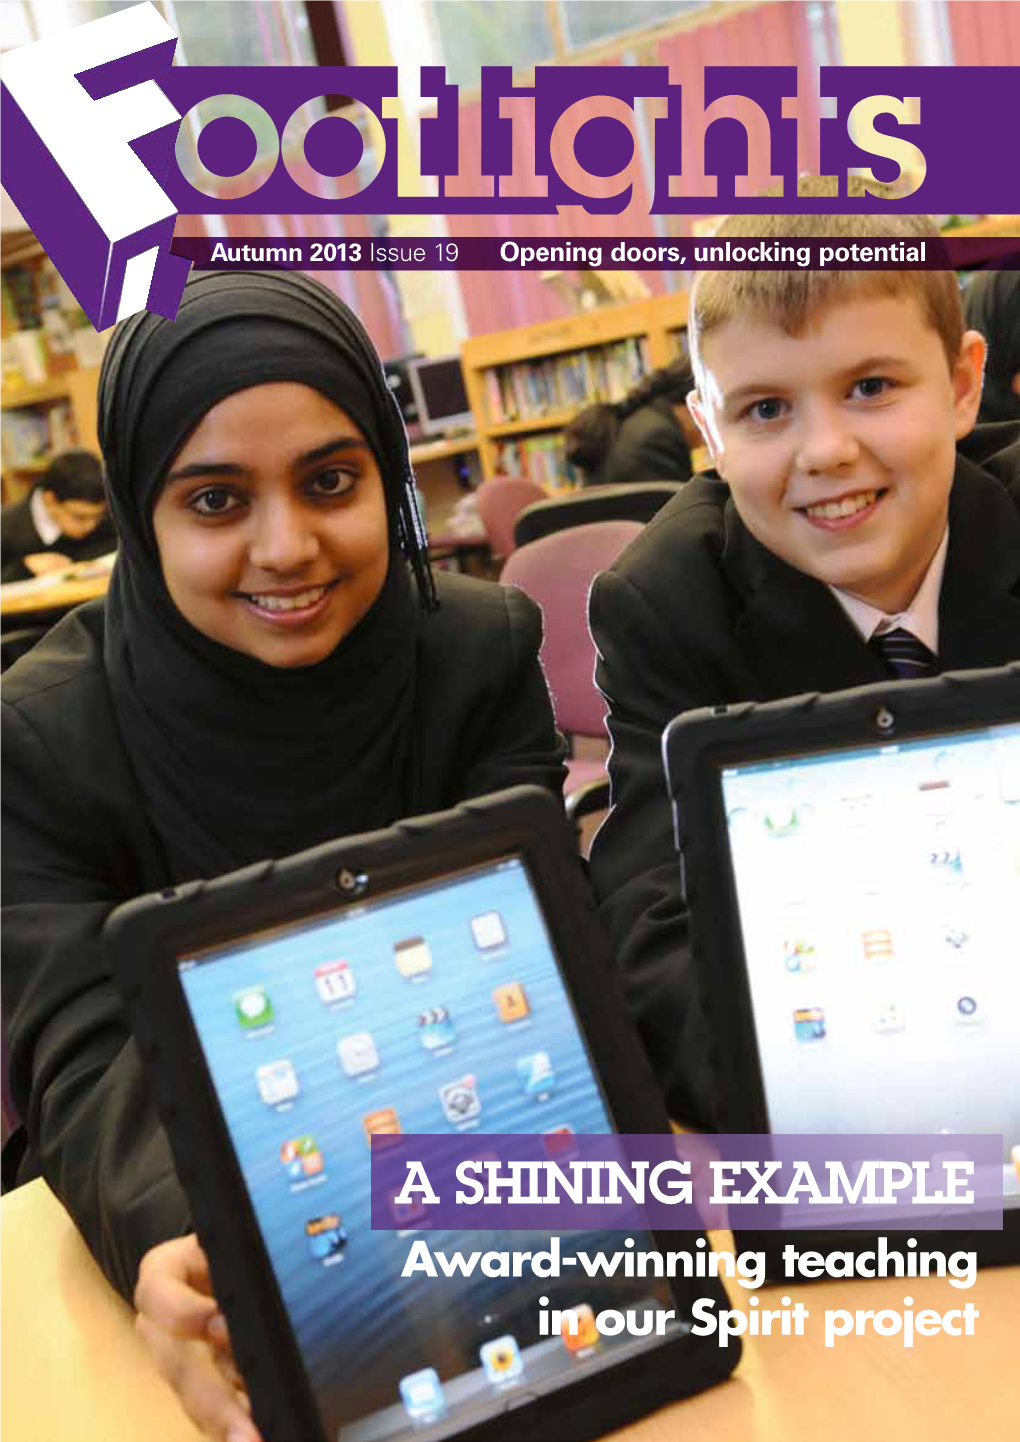 A SHINING EXAMPLE Award-Winning Teaching in Our Spirit Project the NEWS MAGAZINE of FALINGE PARK HIGH SCHOOL